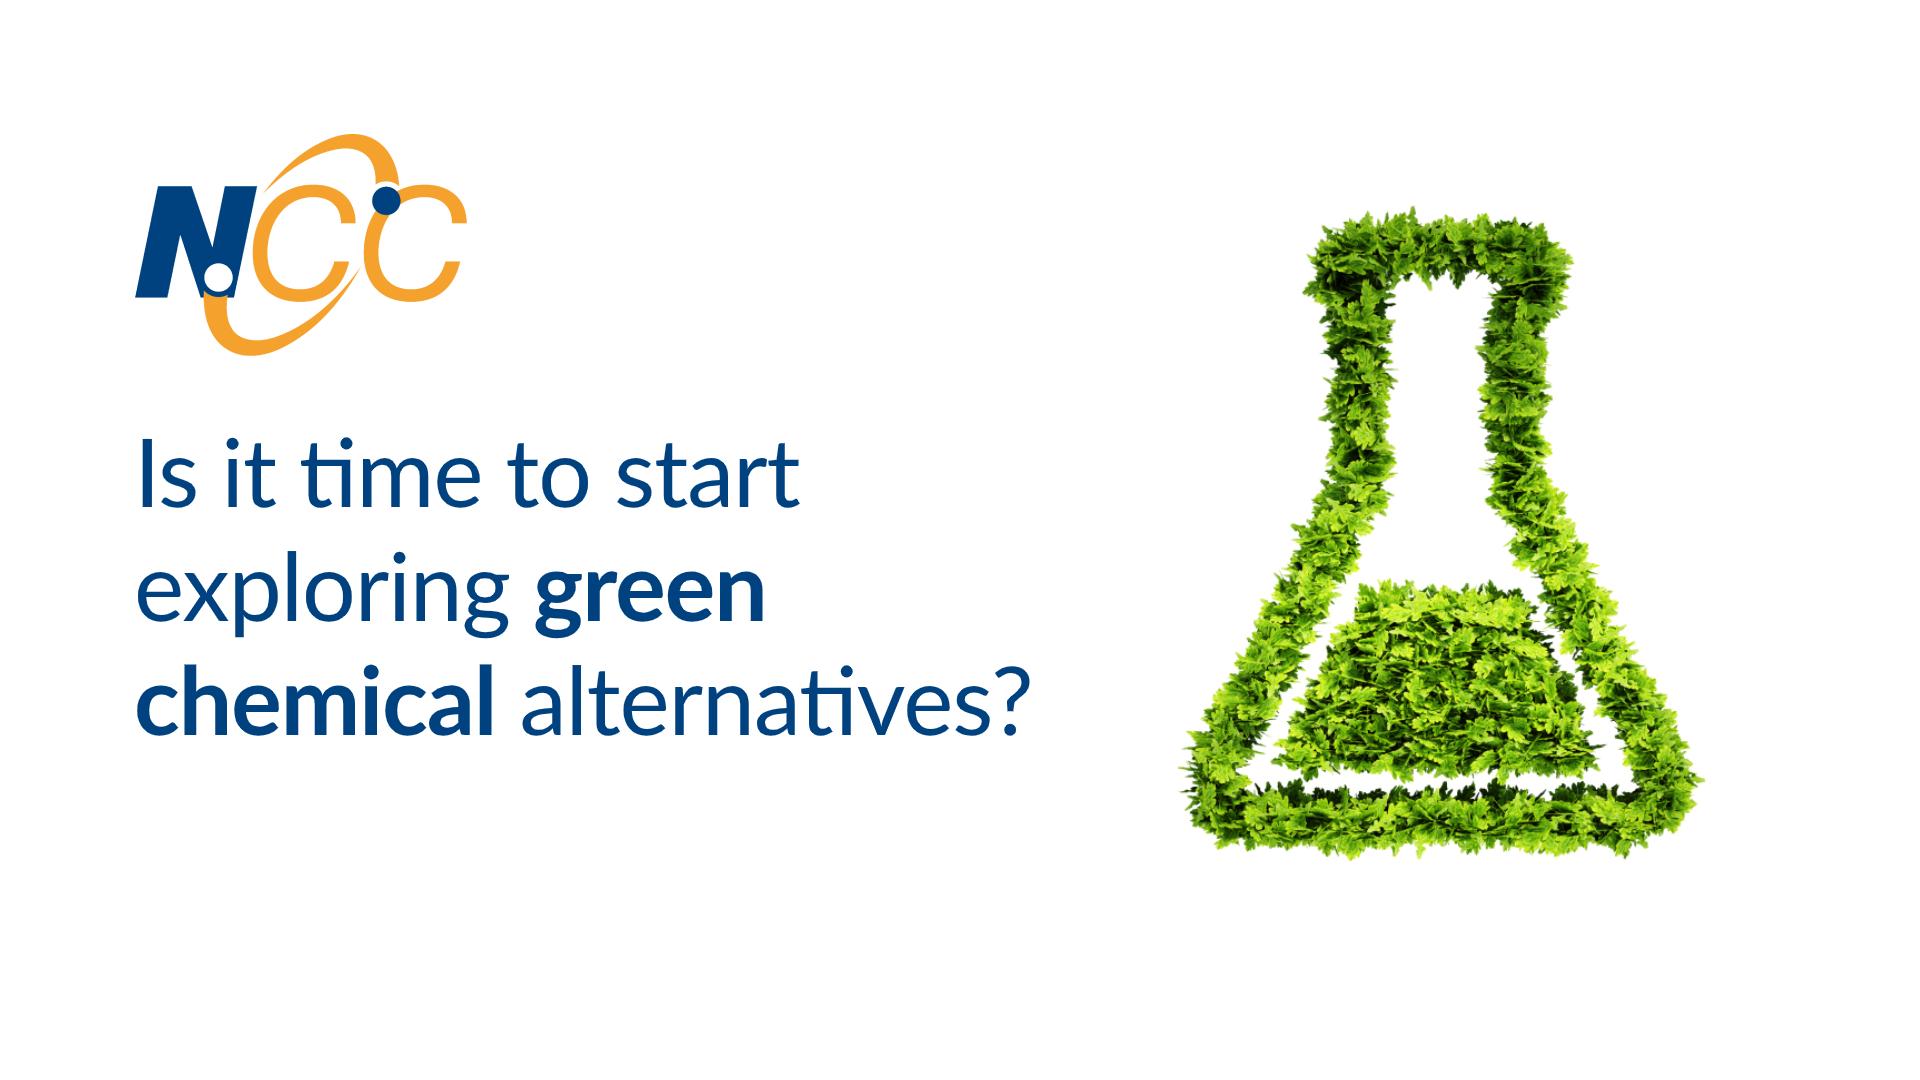 Is it time to start exploring green chemical alternatives?